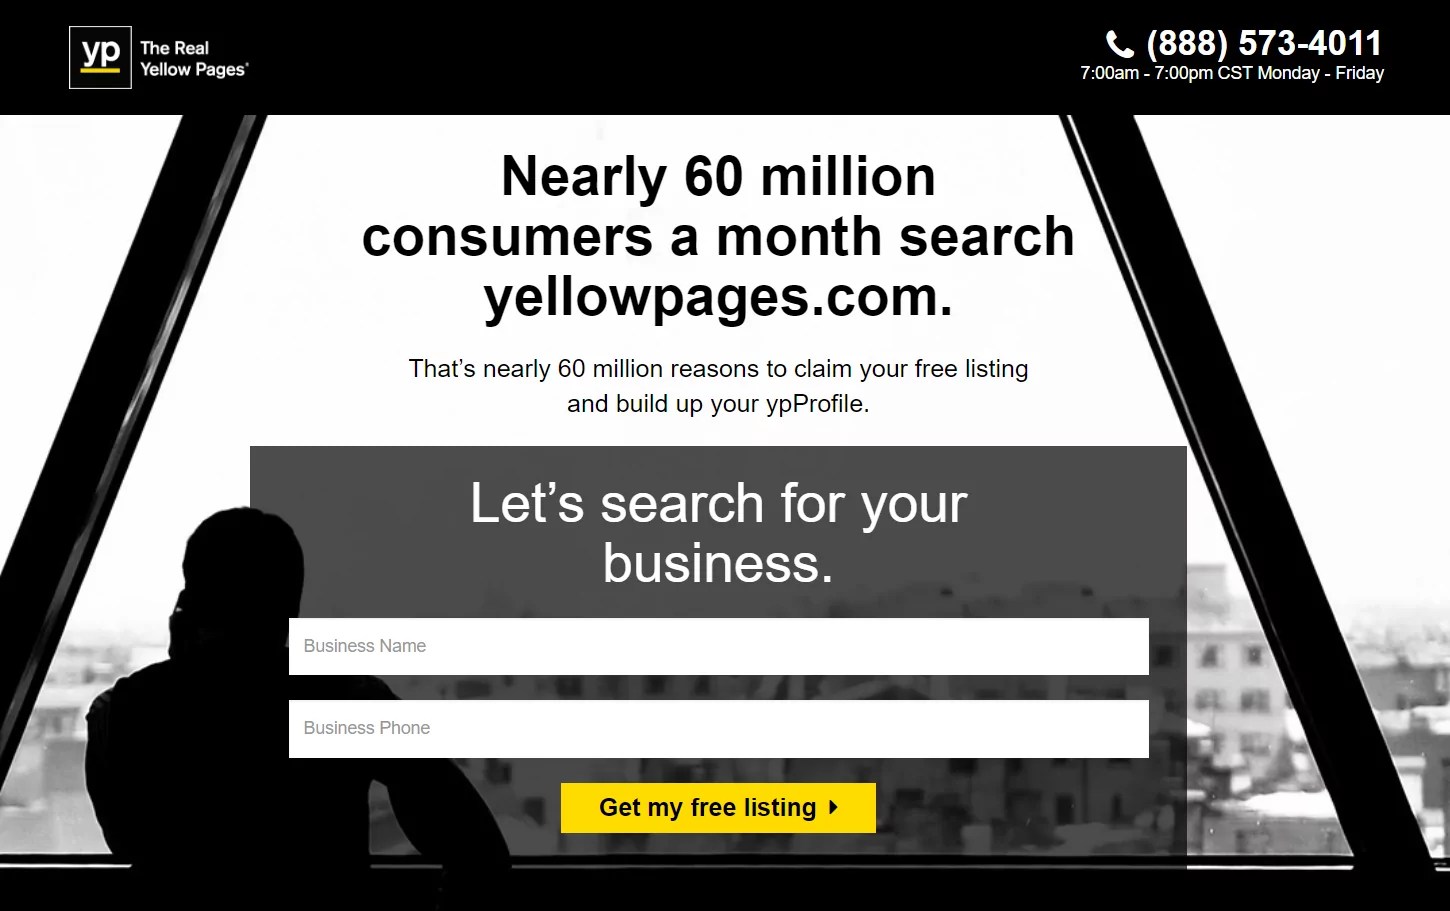 Yellow Pages landing page inspiration